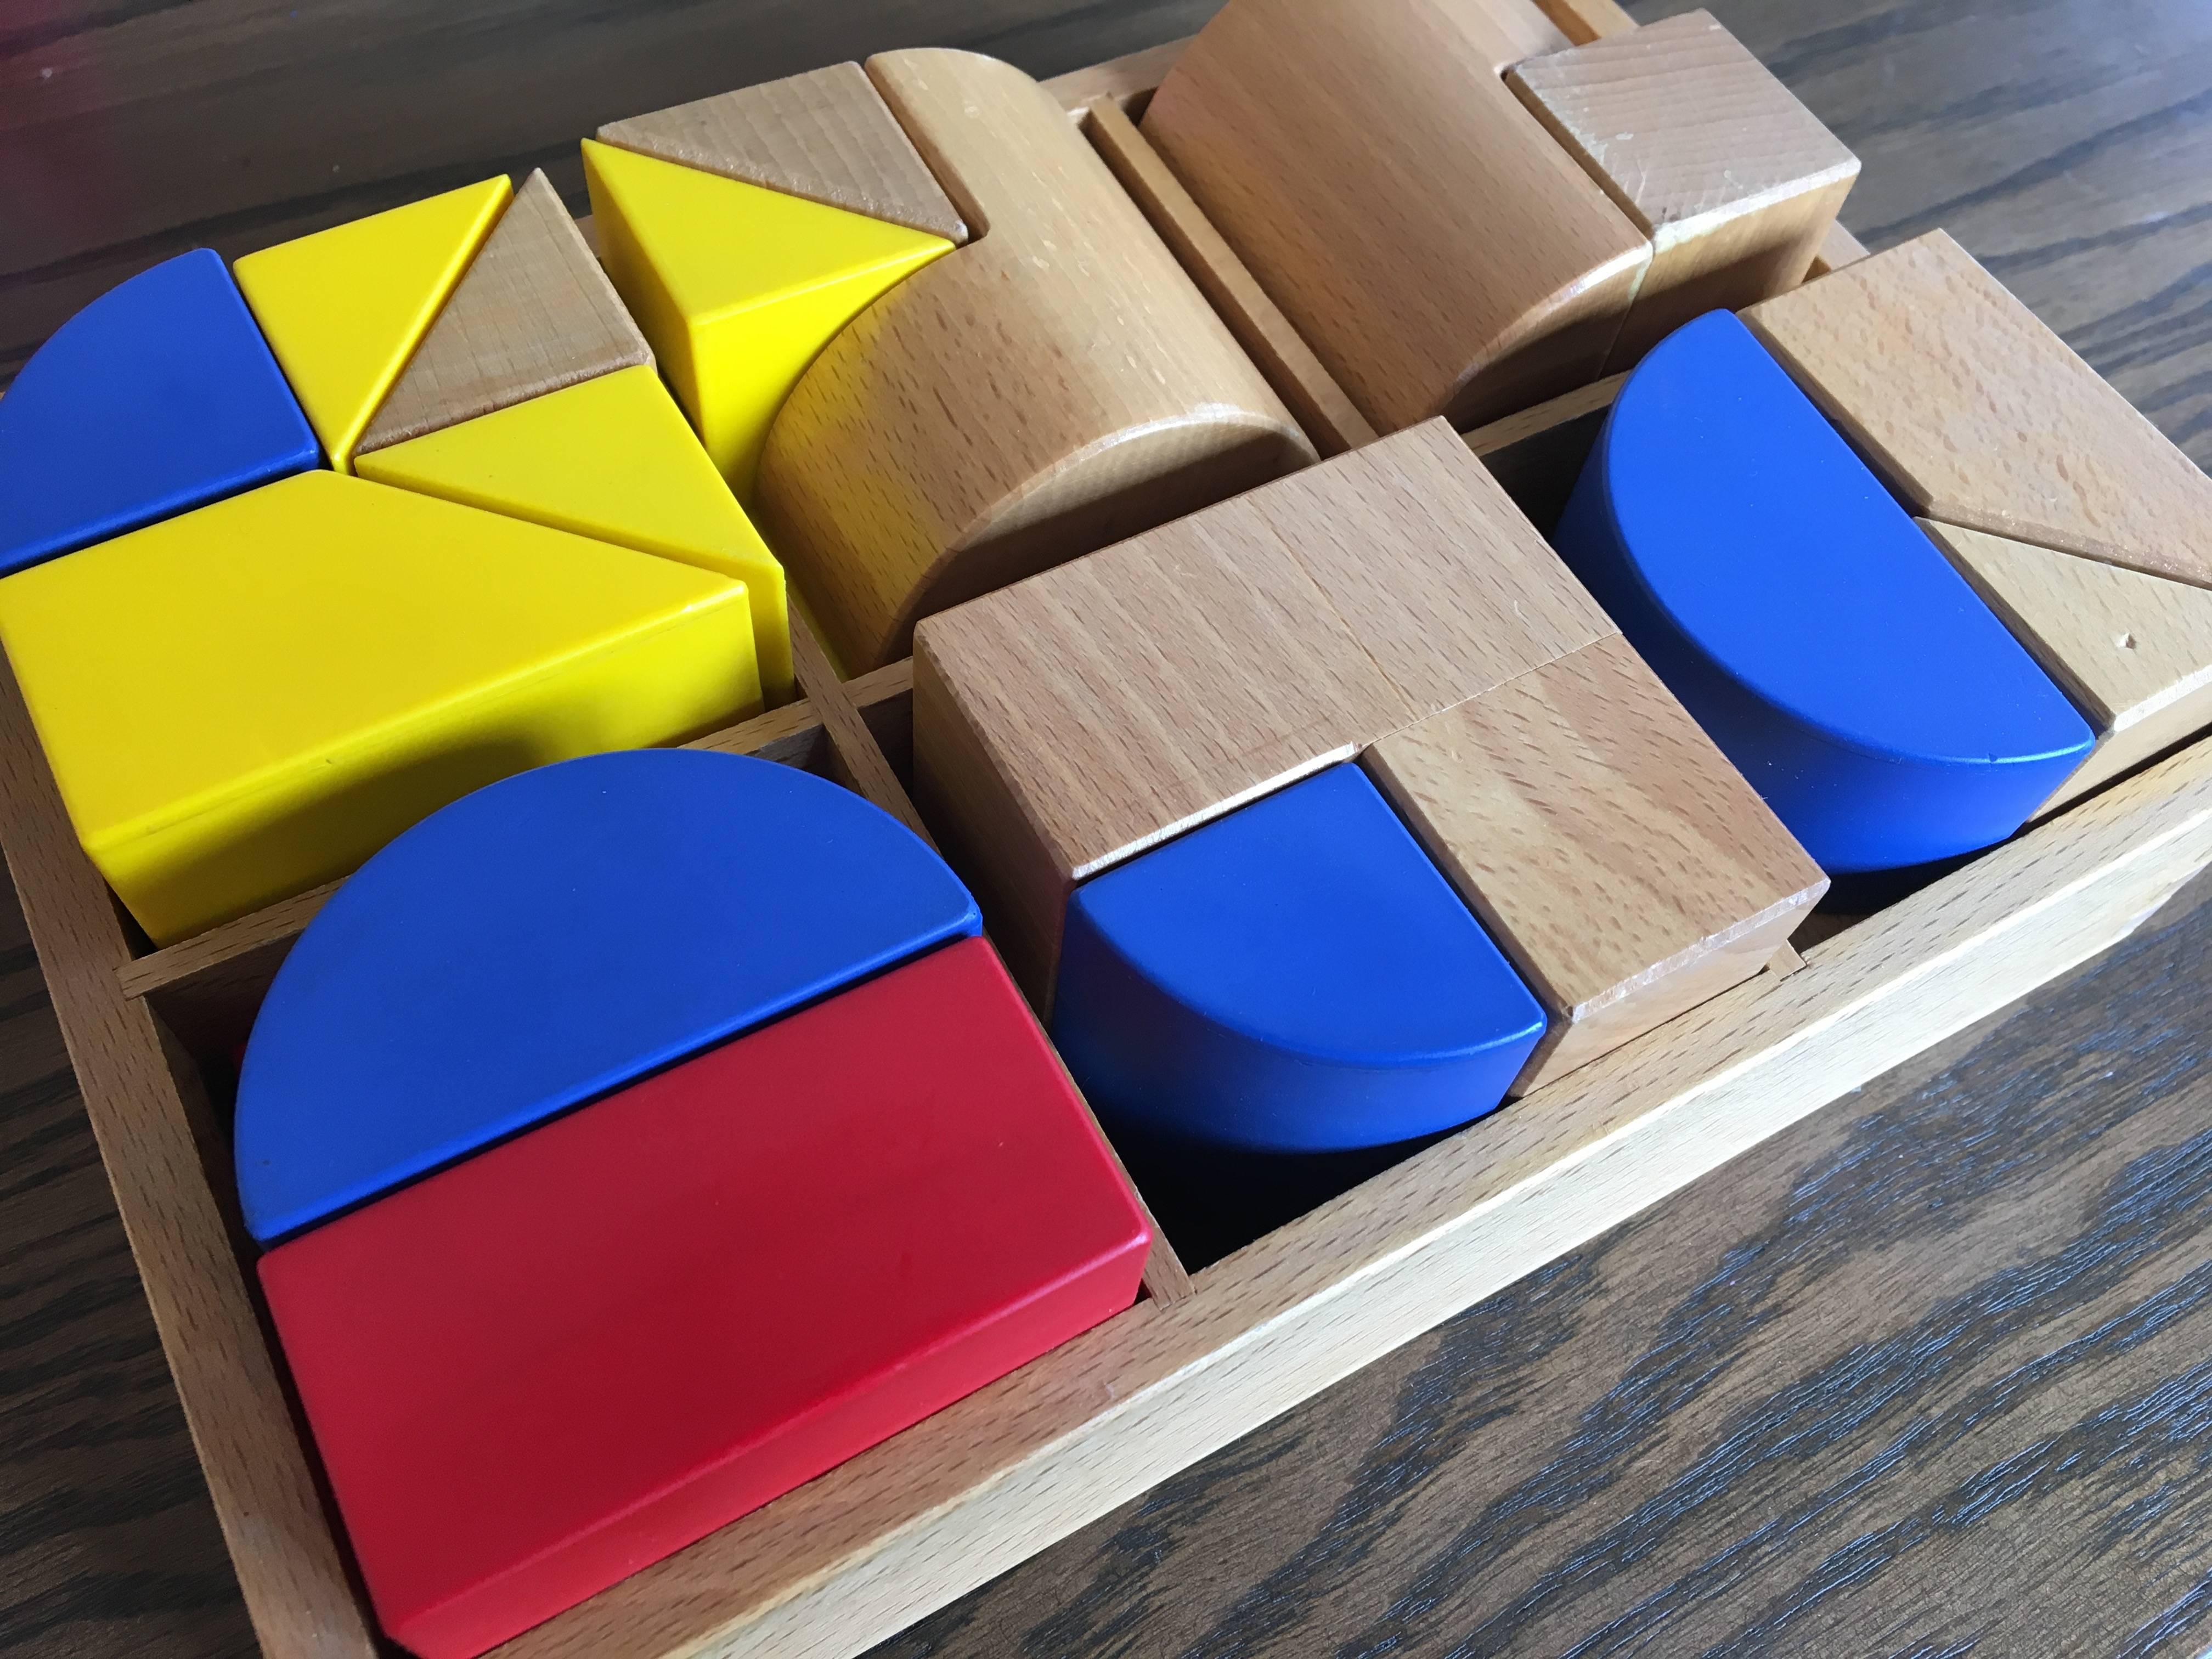 Wood Educube by French Designer Jean-Pierre Moussaud Canetti